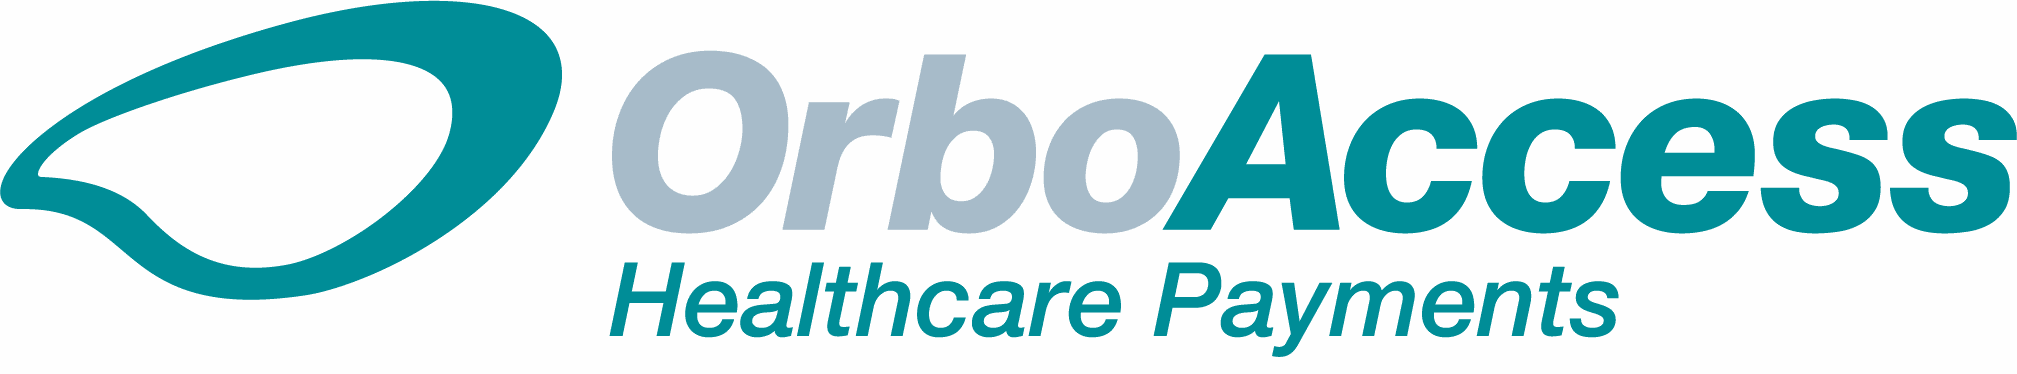 orboaccess healthcare payments